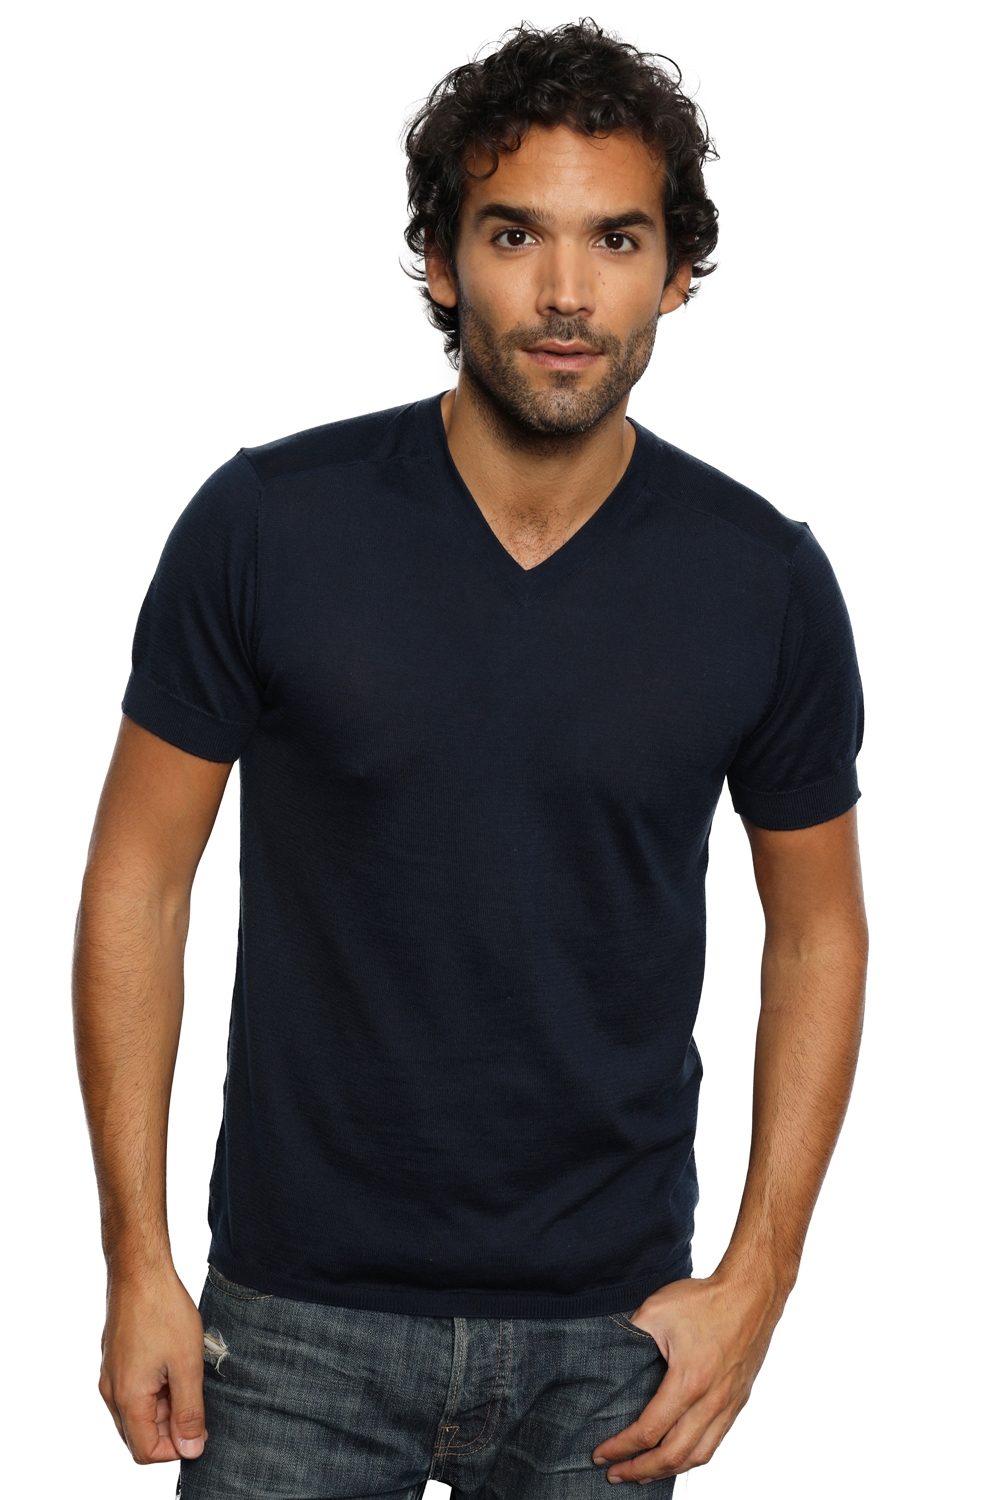 Coton Giza 45 pull homme michael marine s